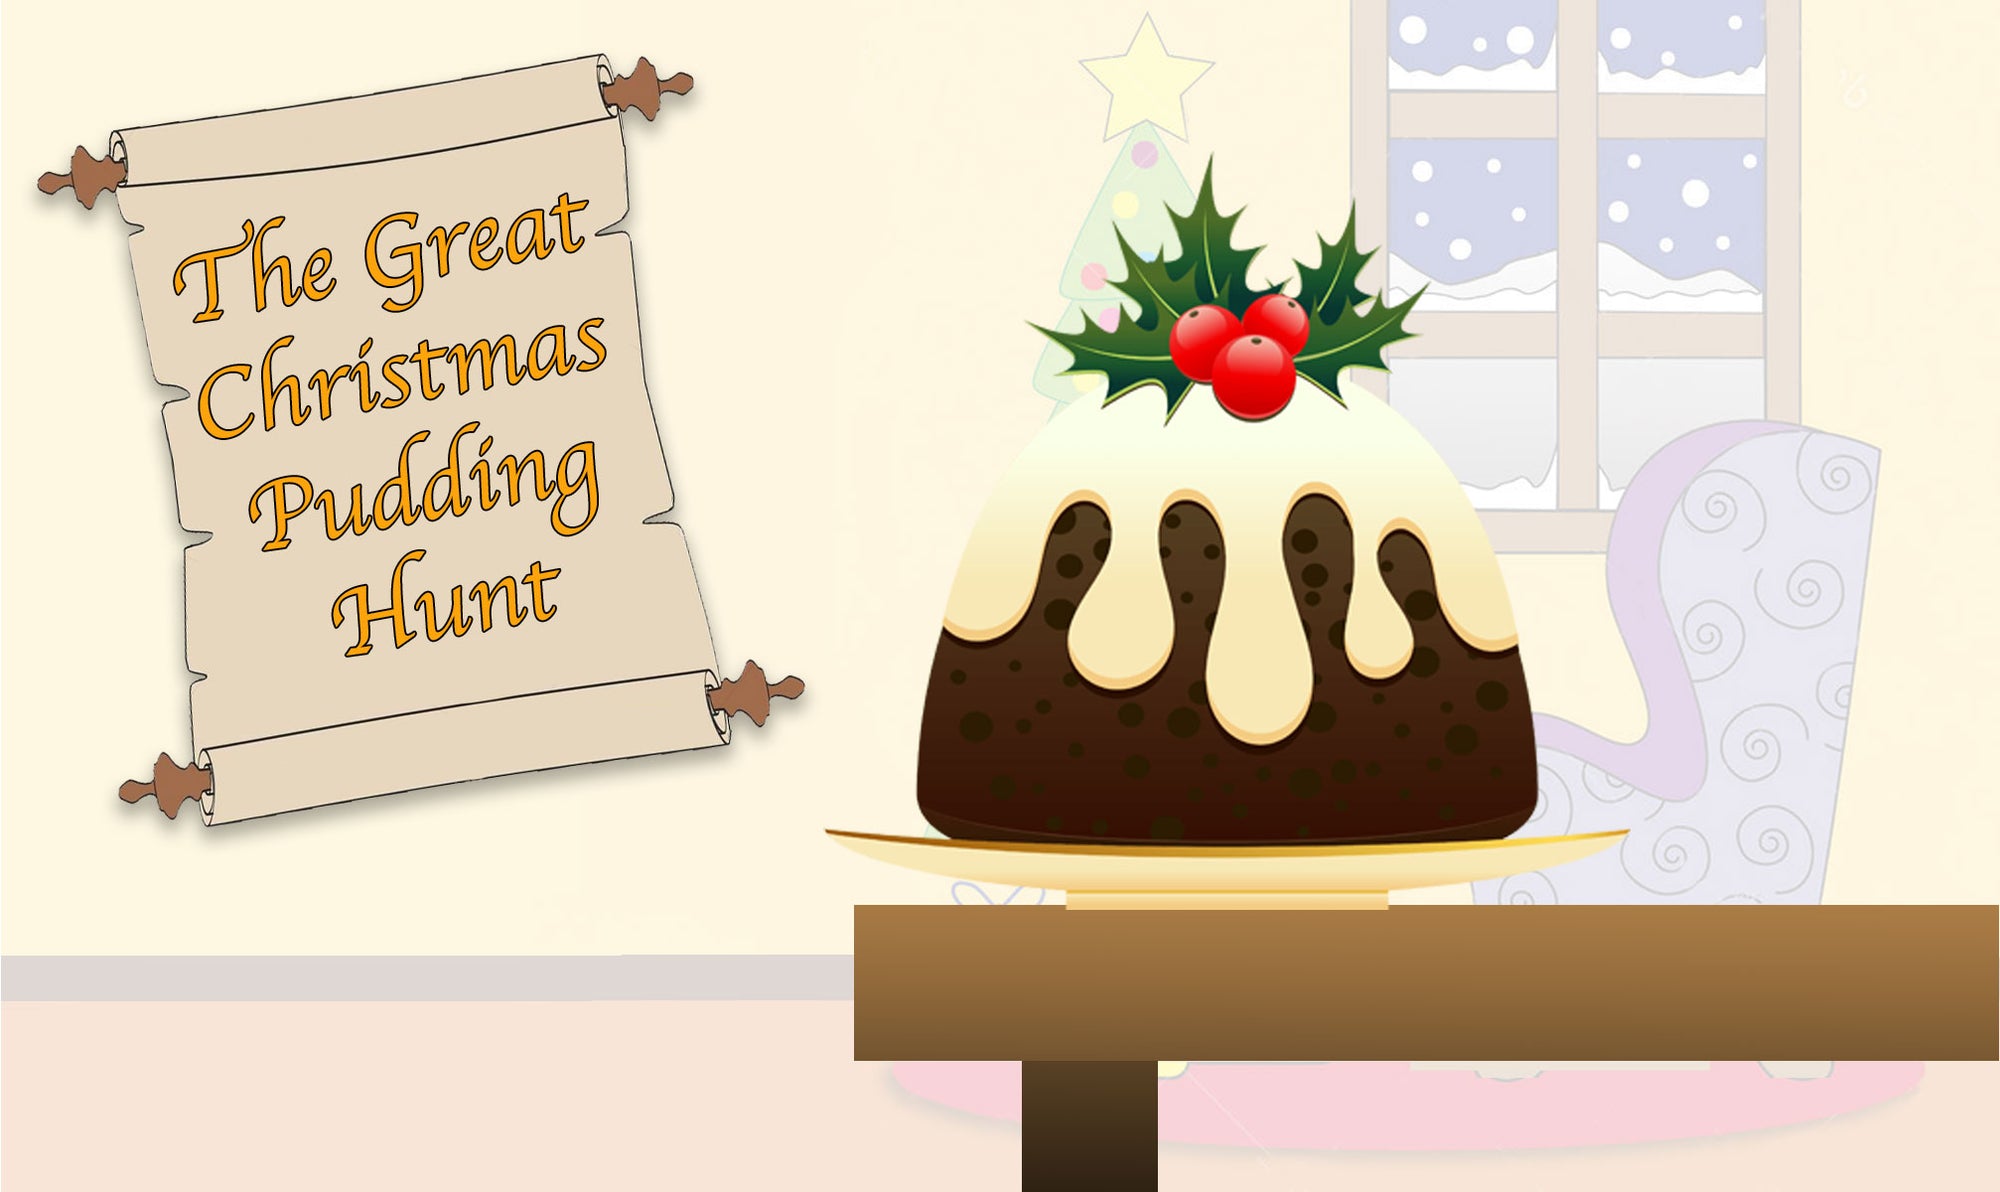 Get ready for the Great Christmas Pudding Hunt